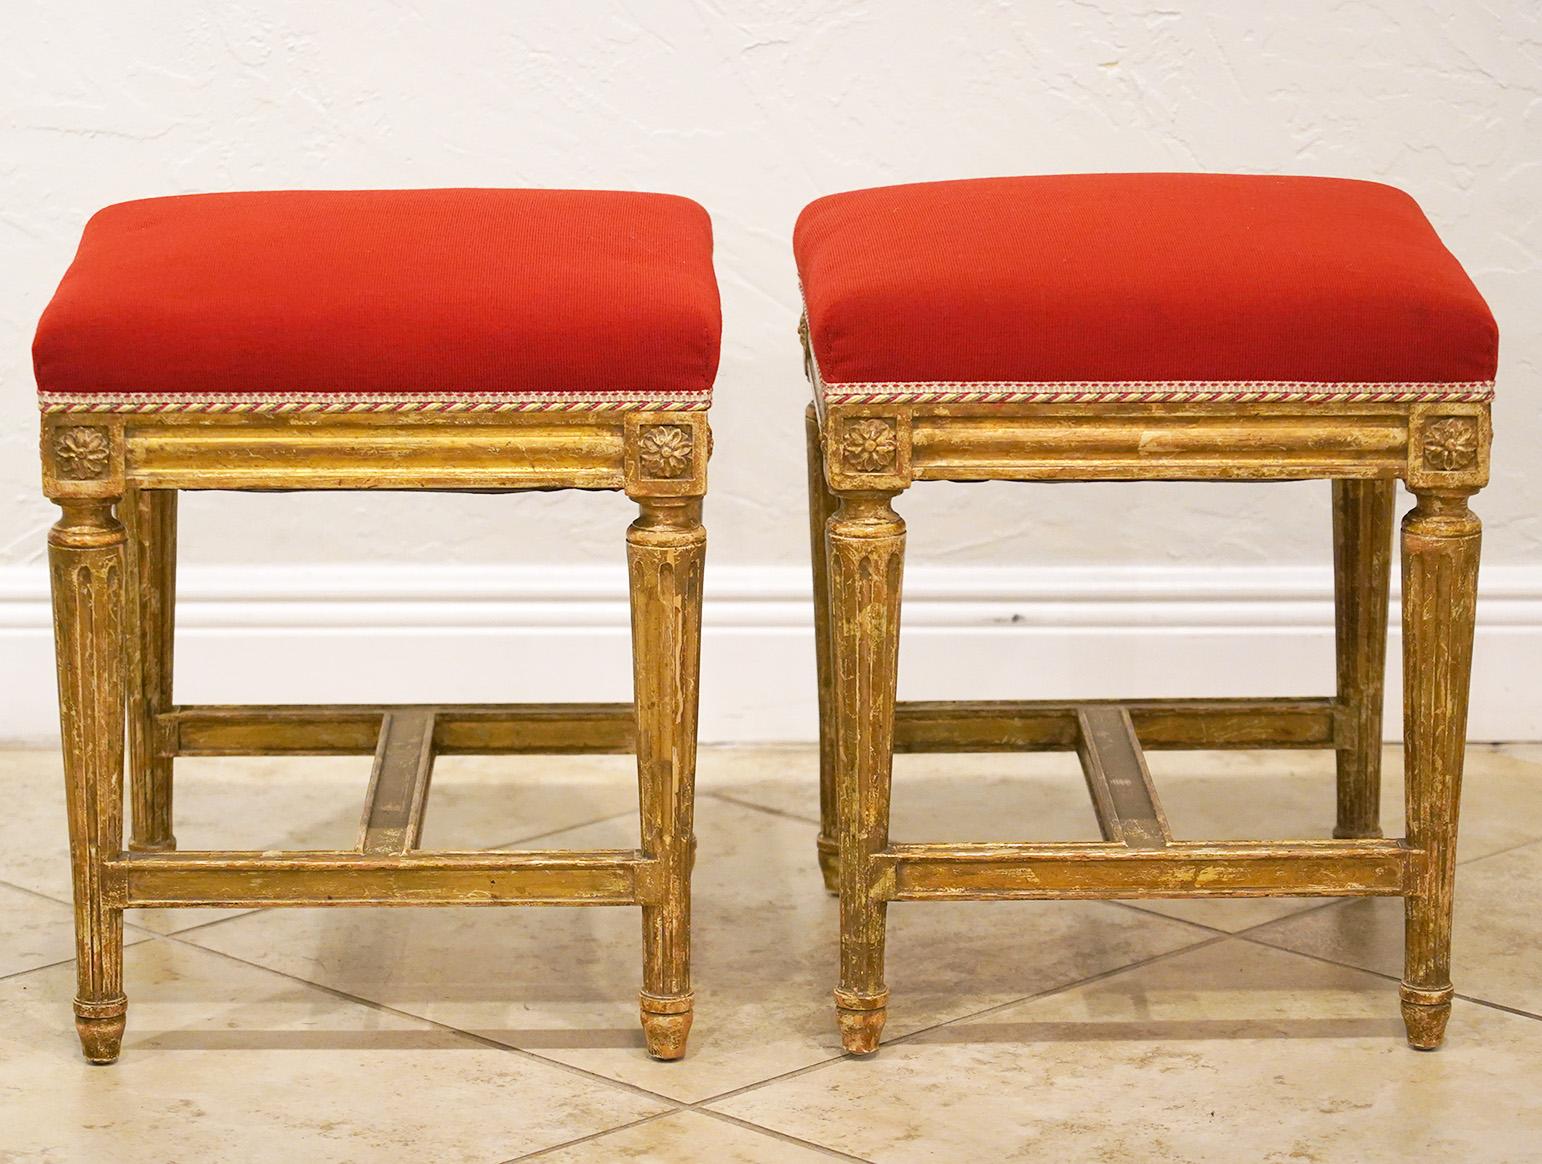 Carved Pair of French Louis XVI Style Paint and Gilt Upholstered Benches or Stools